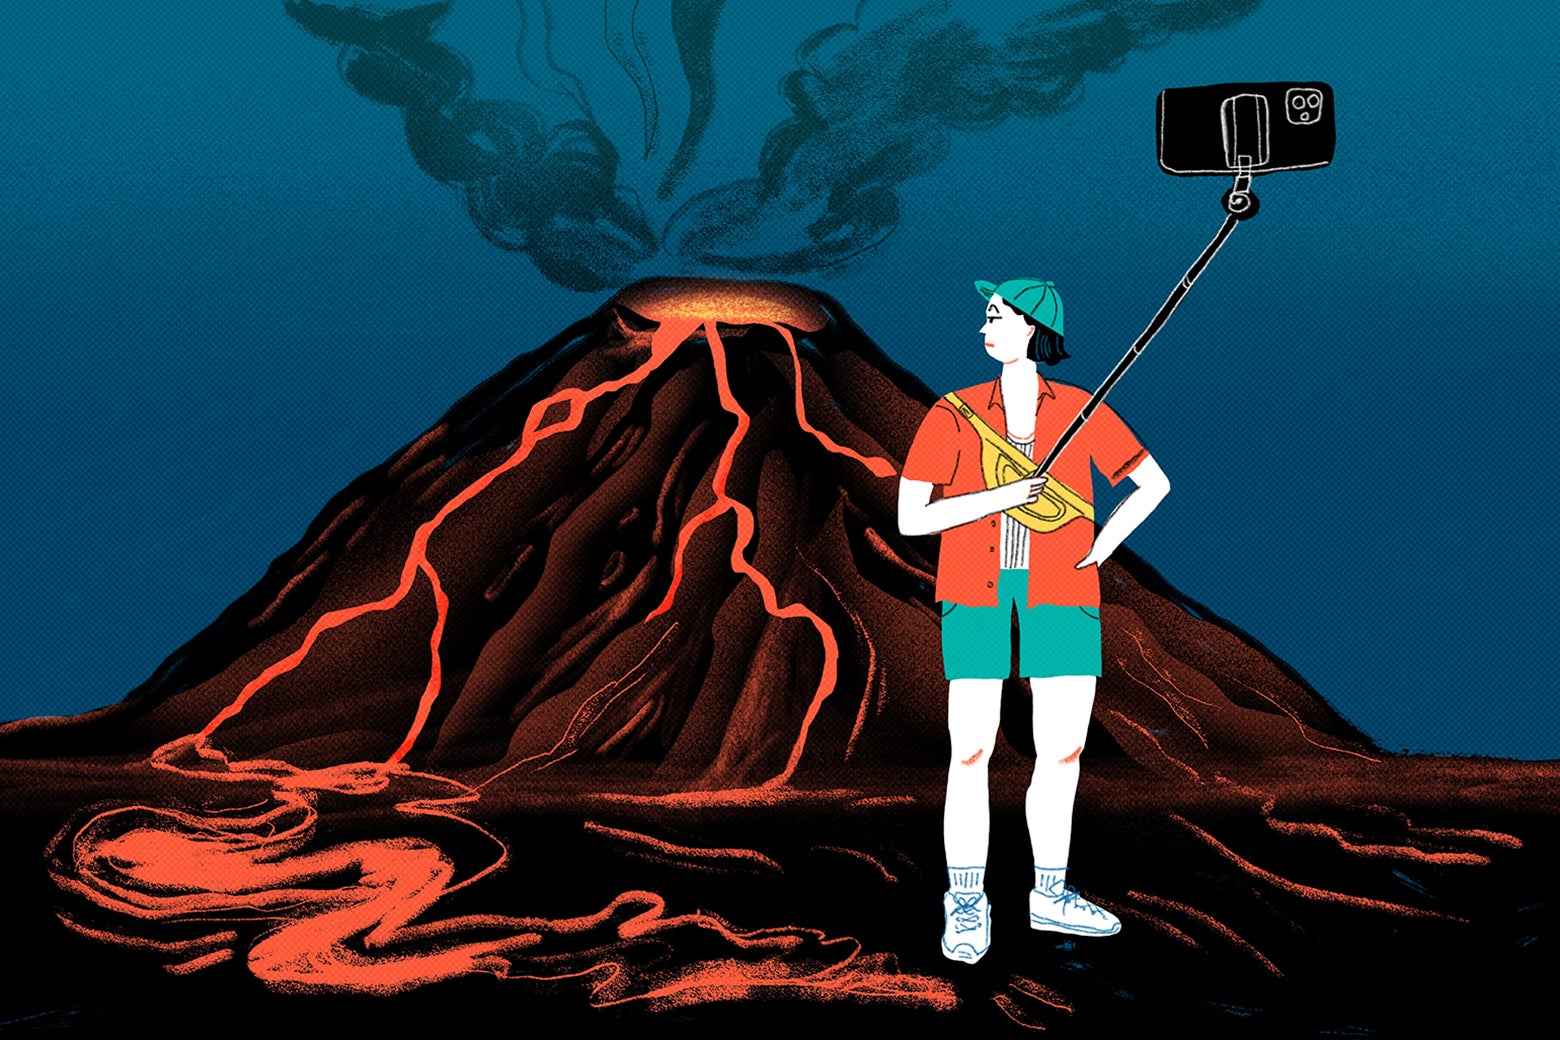 With an erupting volcano behind them, a tourist looks behind them with vague interest and snaps a photo with a selfie stick.